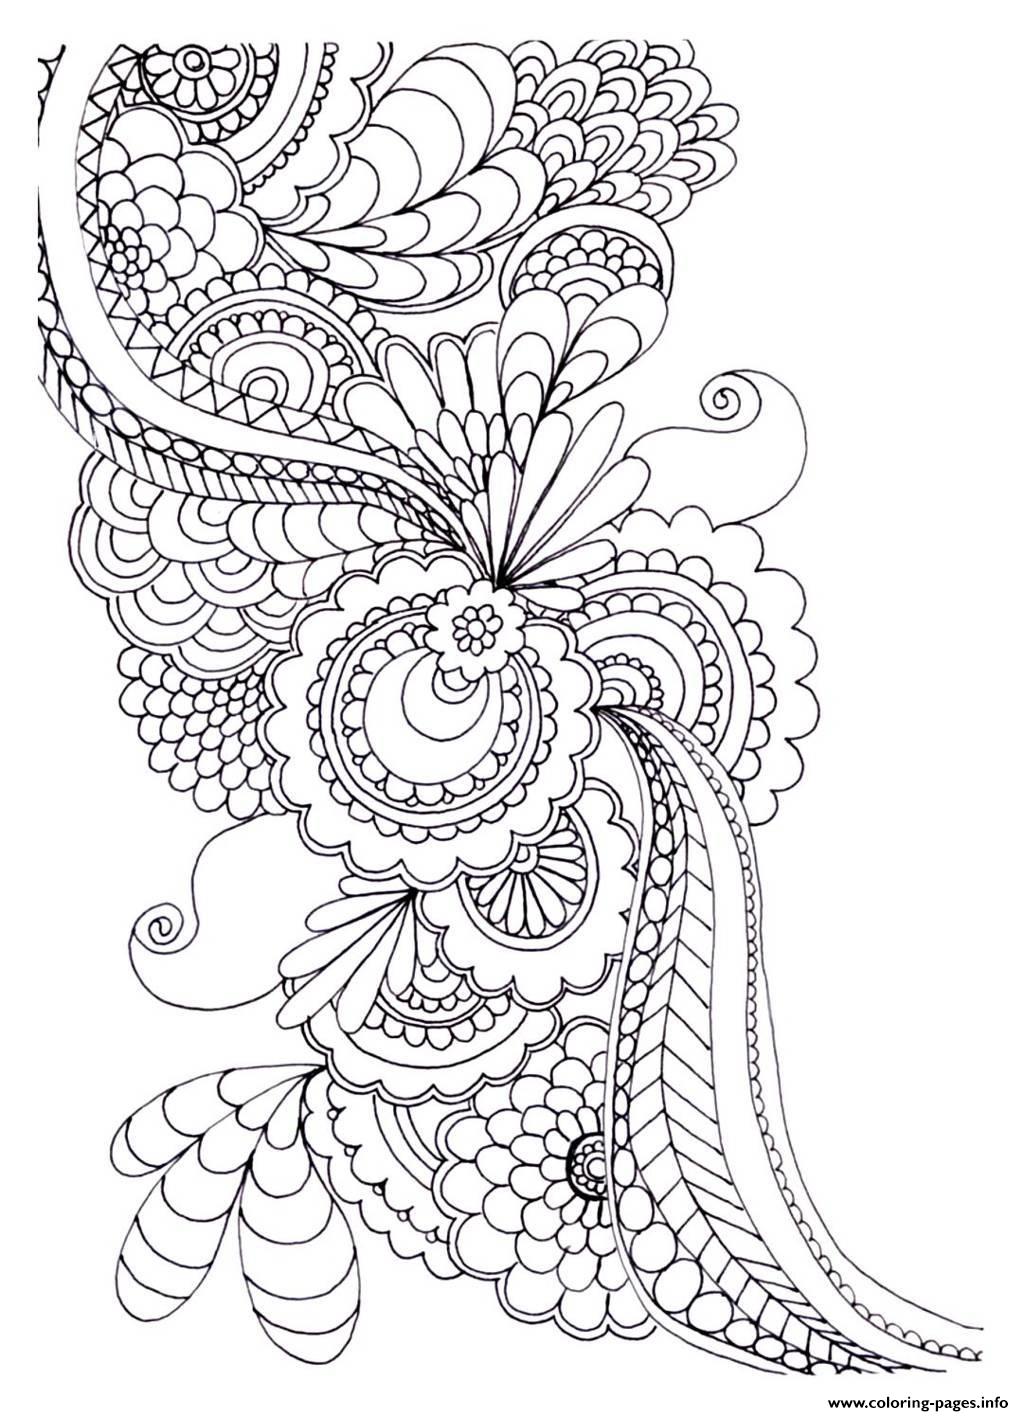 Adult Zen Anti Stress To Print Drawing Flowers coloring pages